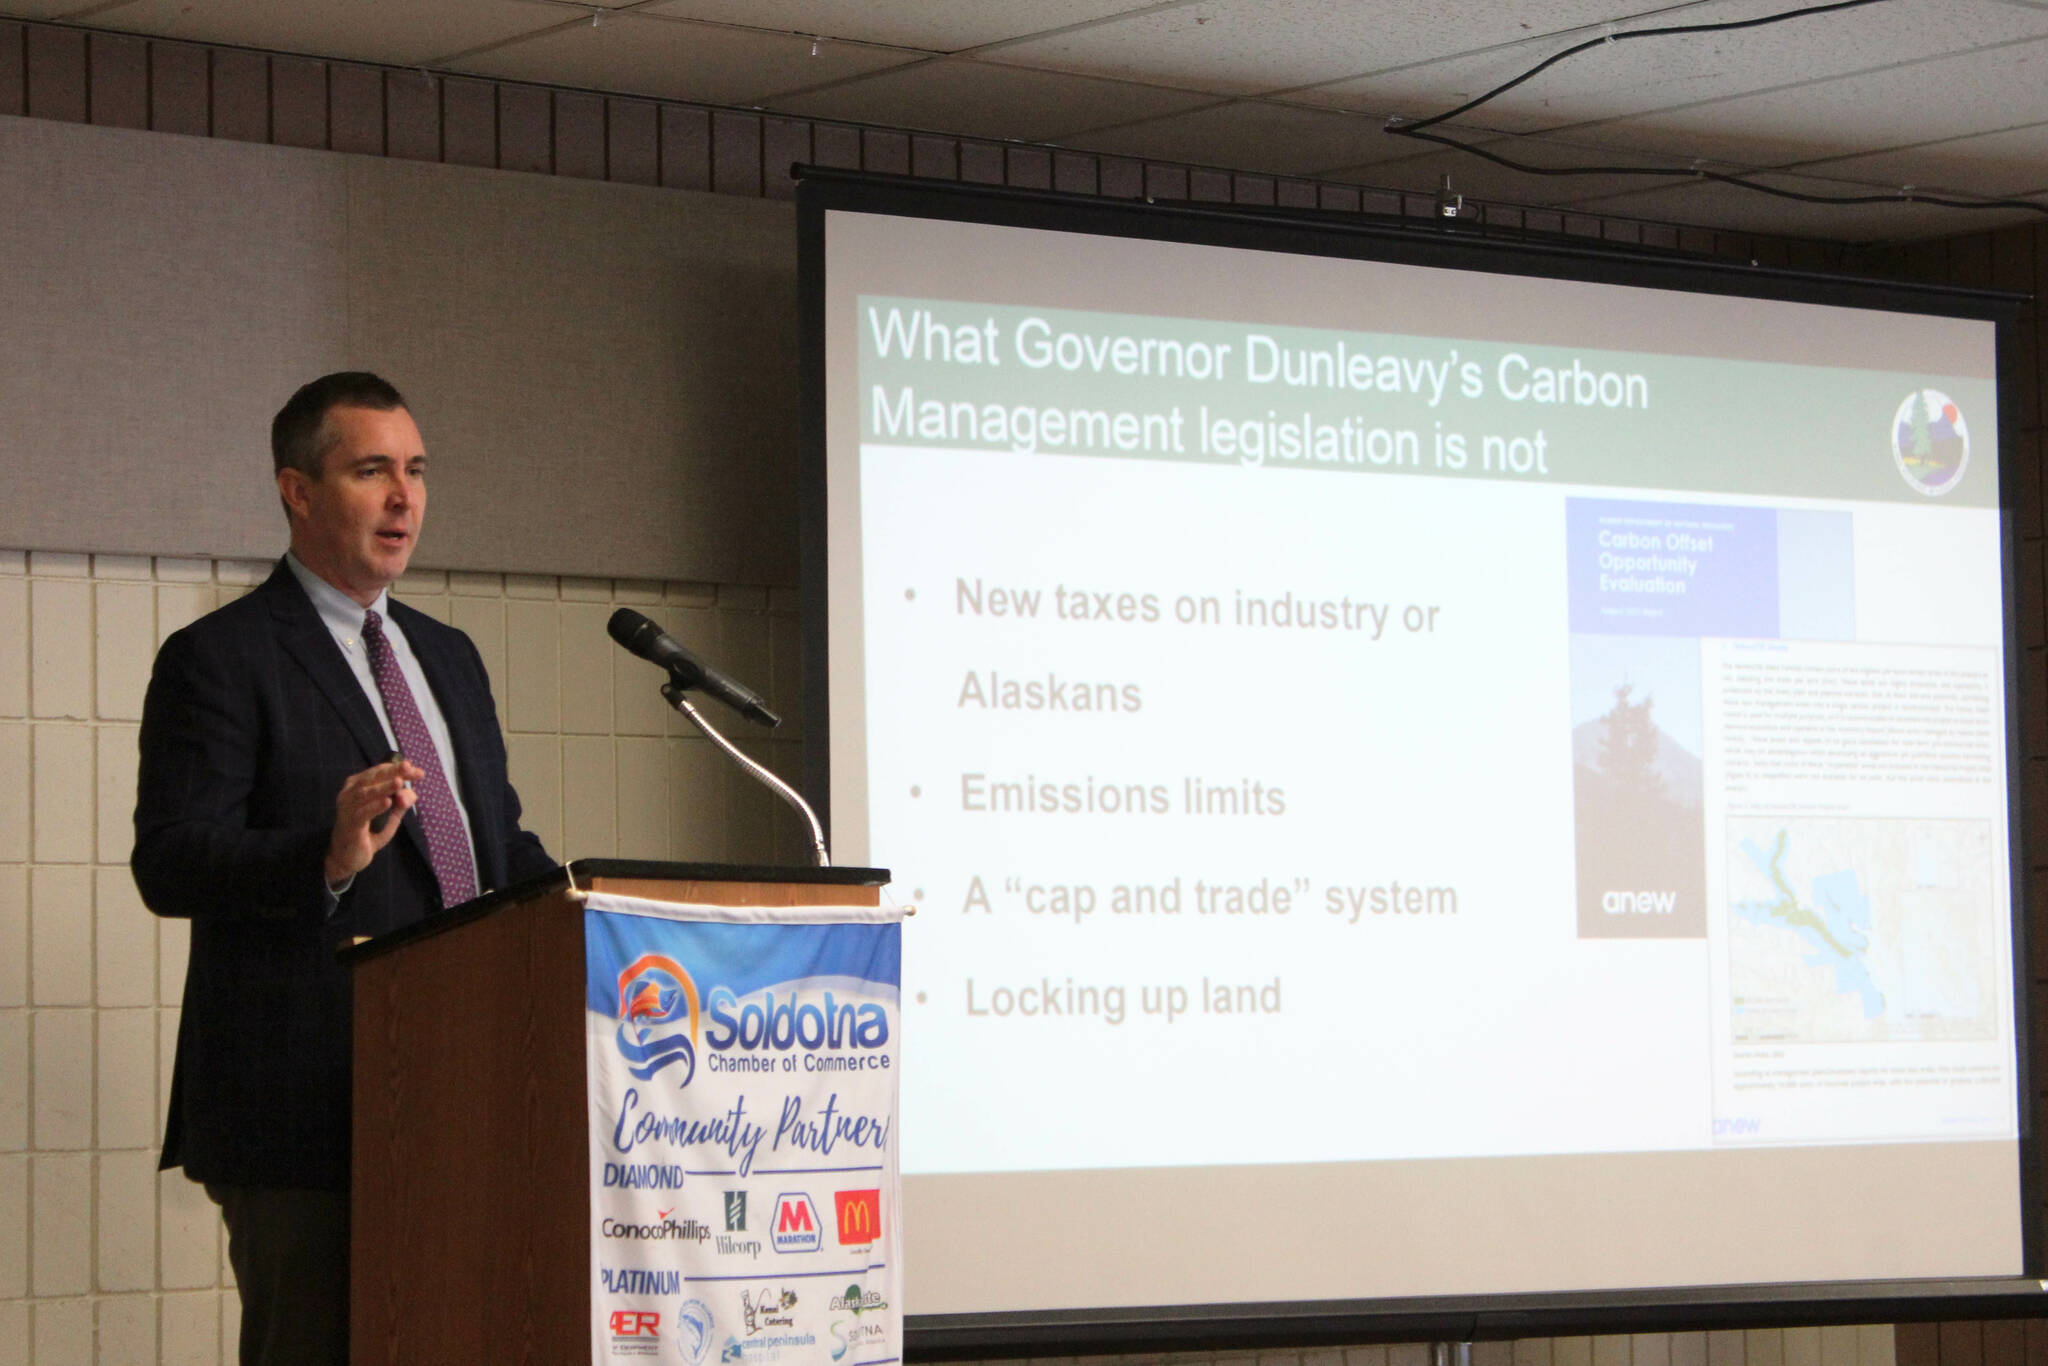 Alaska Department of Natural Resources Commissioner-designee John Boyle presents information about carbon capture, utilization and storage during a Soldotna Chamber of Commerce luncheon on Friday, April 14, 2023, in Soldotna, Alaska. (Ashlyn O’Hara/Peninsula Clarion)